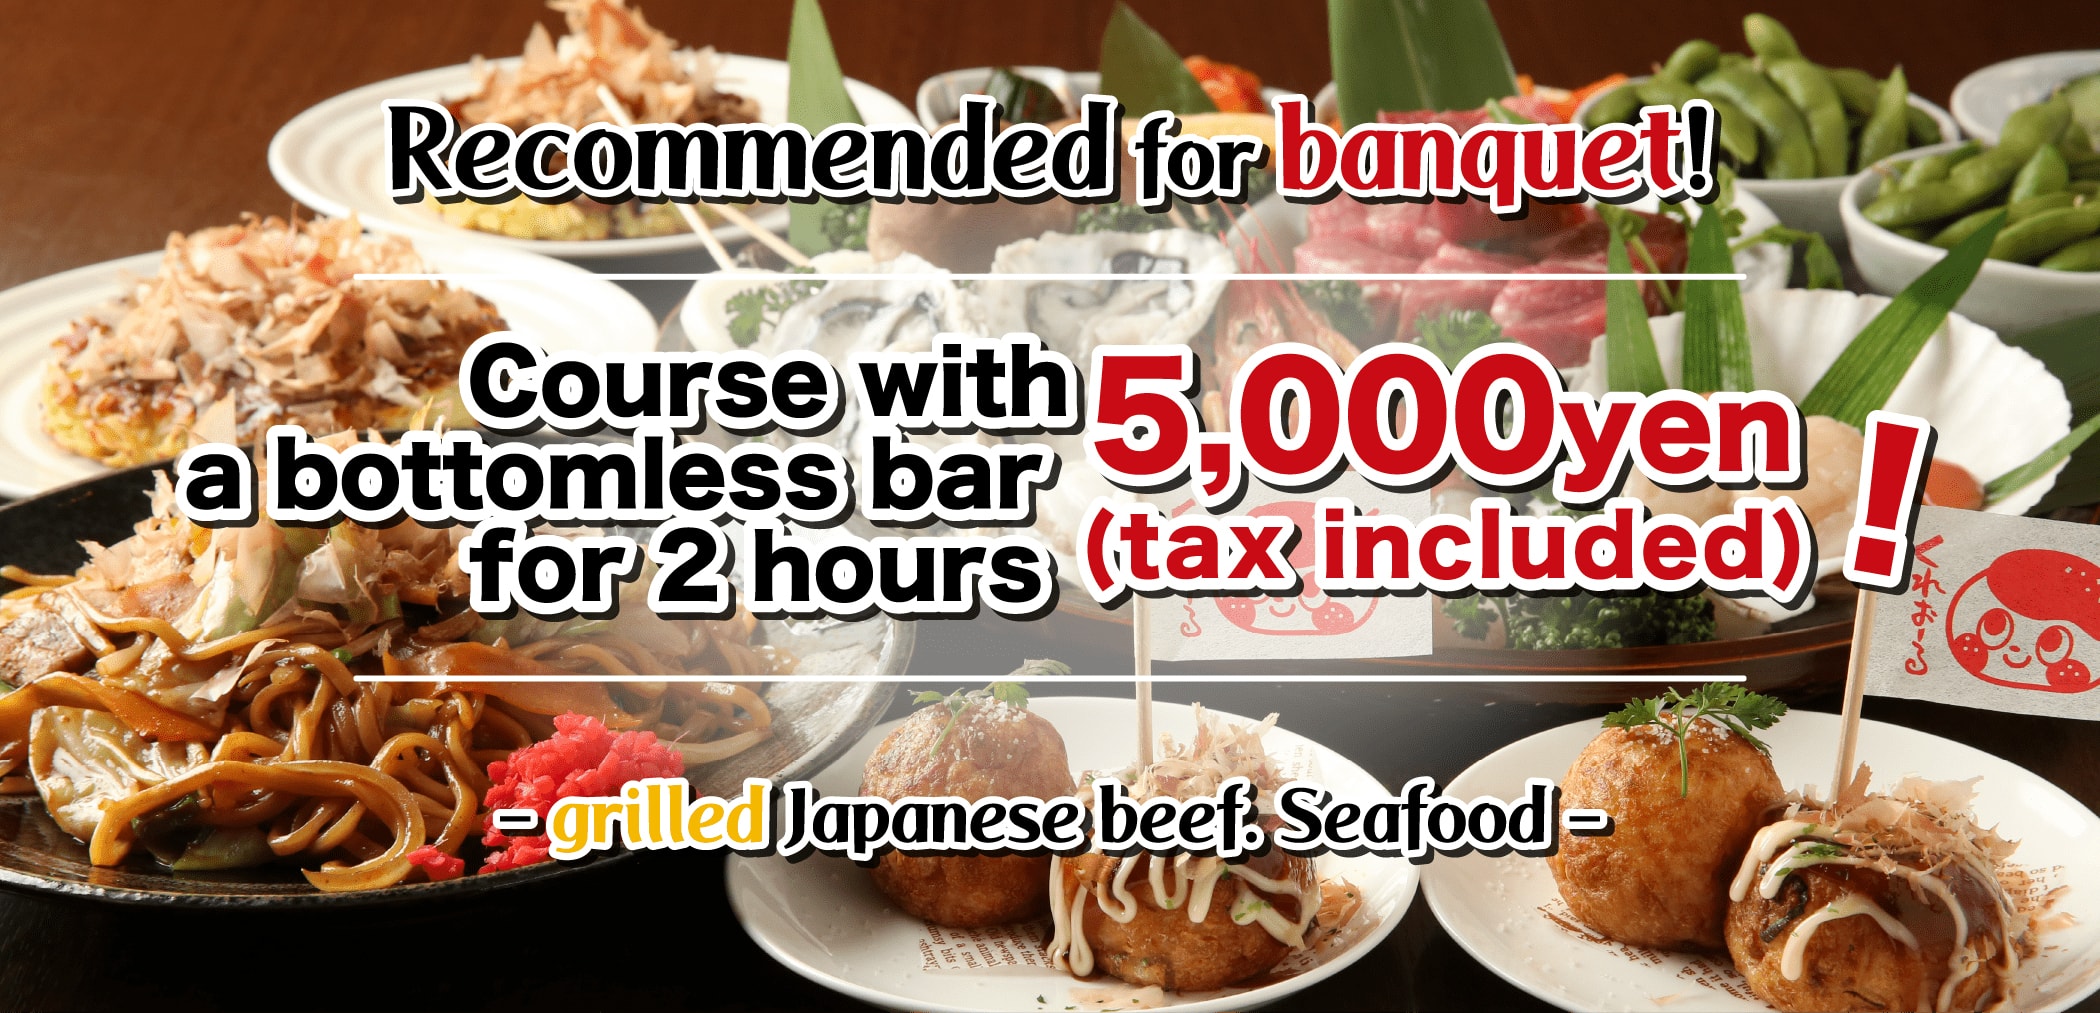 Recommended for banquet!Conrse with a bottomless bar for 2 hours 5,000yen(tax included)!